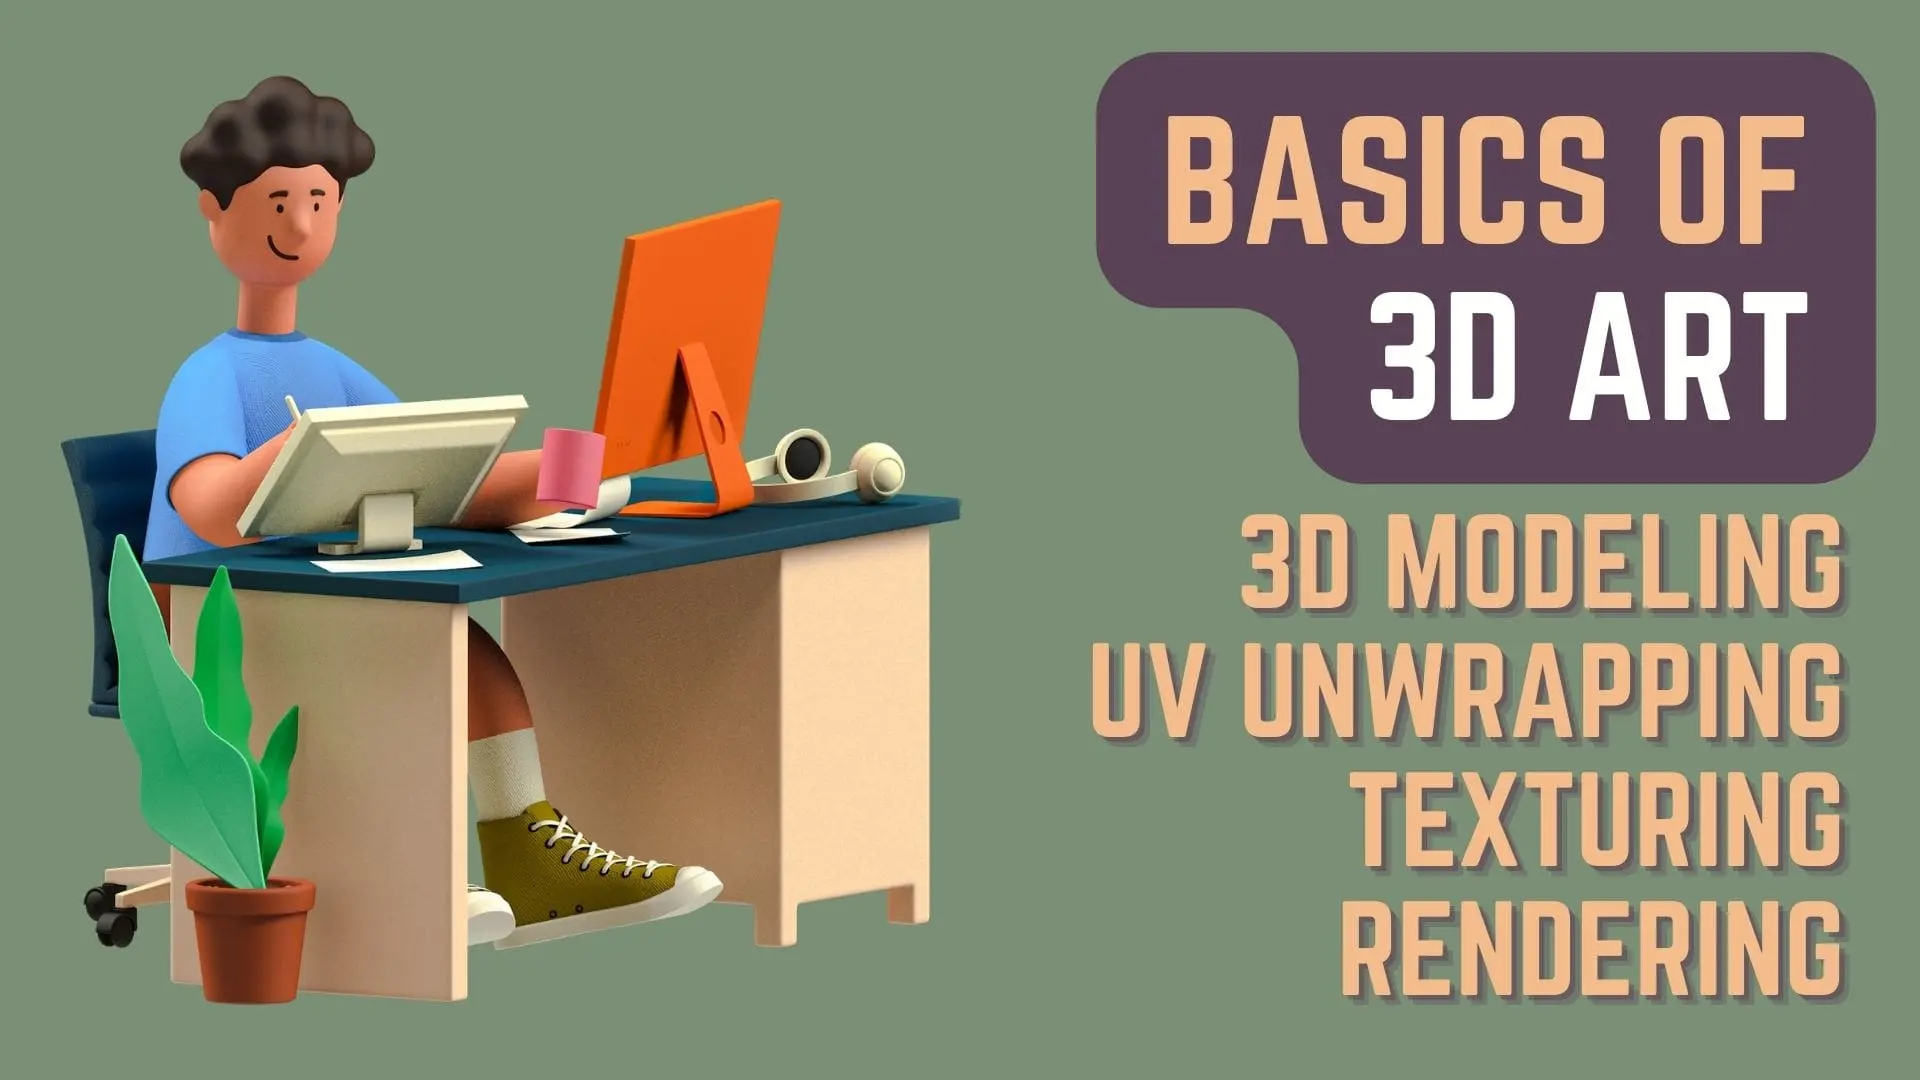 Basics of 3D Art - 3D Modeling, UV Unwrapping, Texturing, Rendering - Featured Image